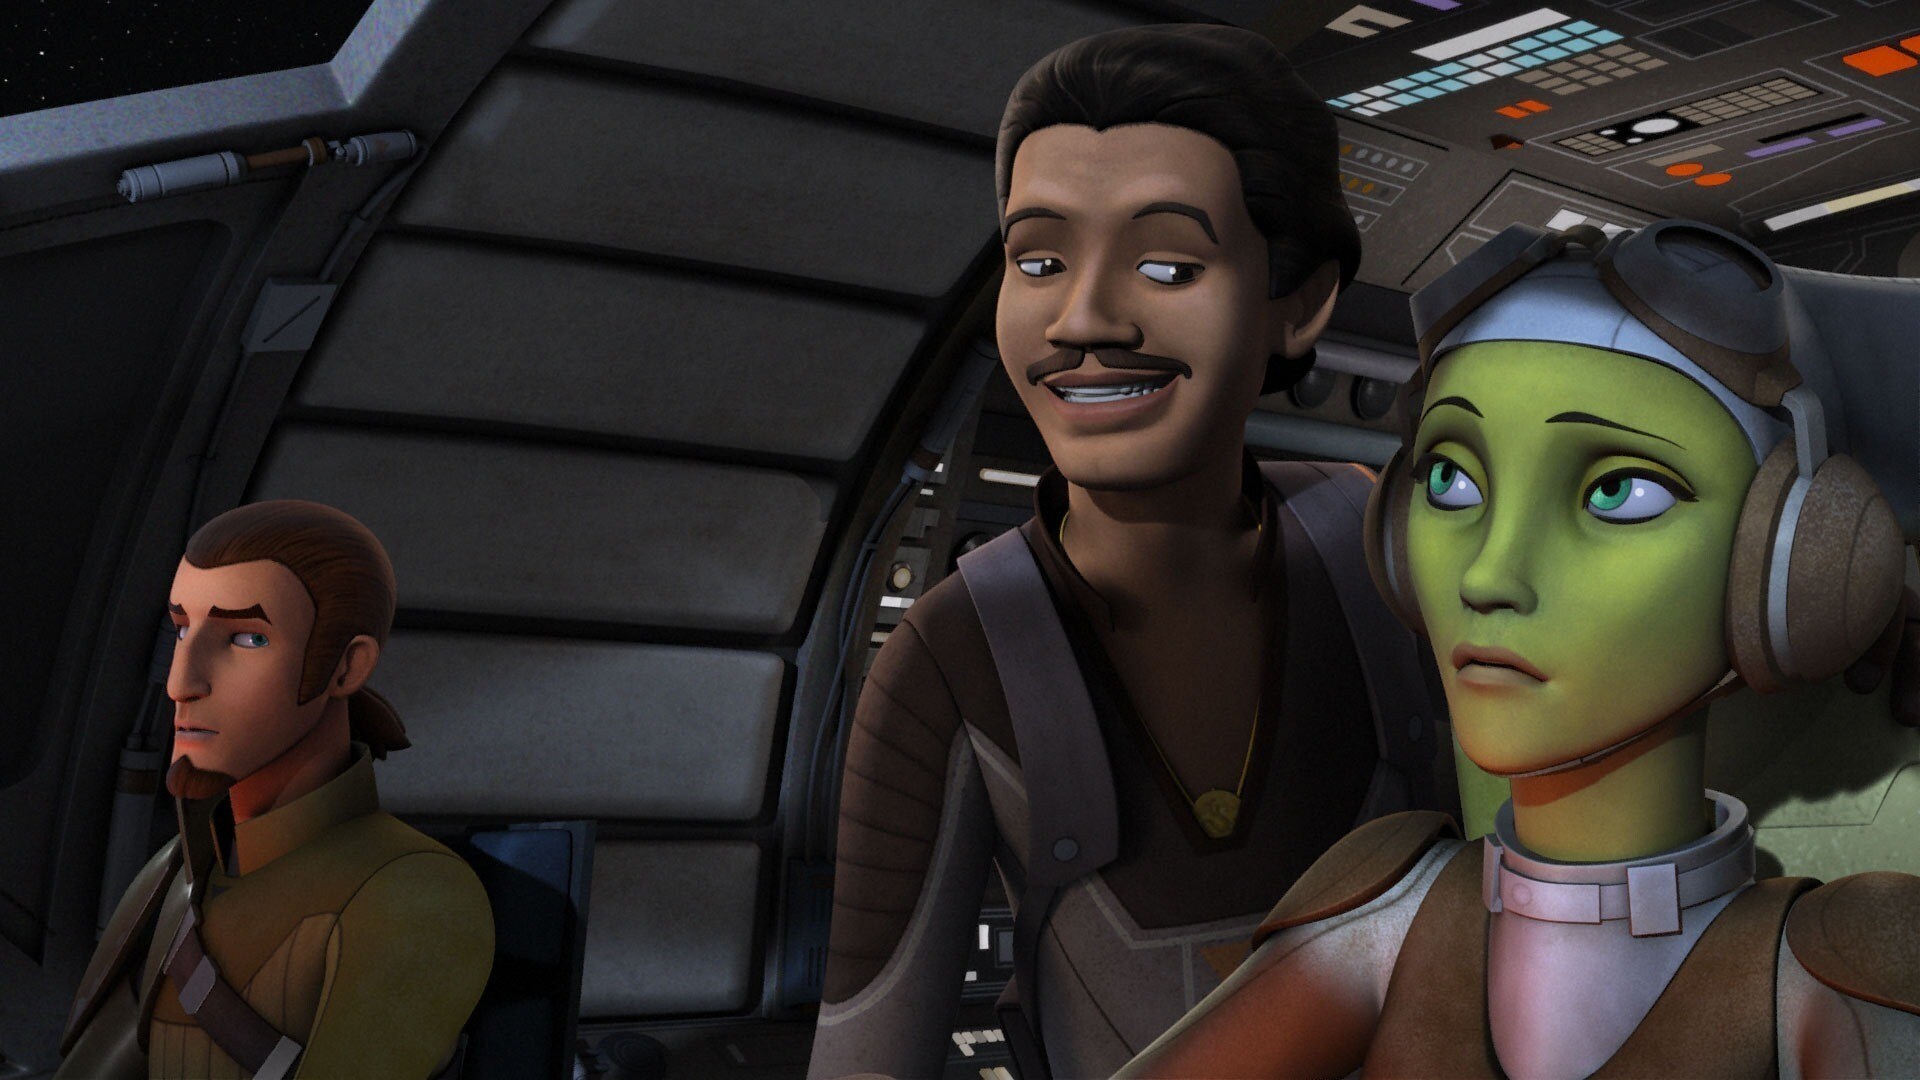 Zeb, Lando, and Hera from "Idiot's Array" episode of Star Wars Rebels